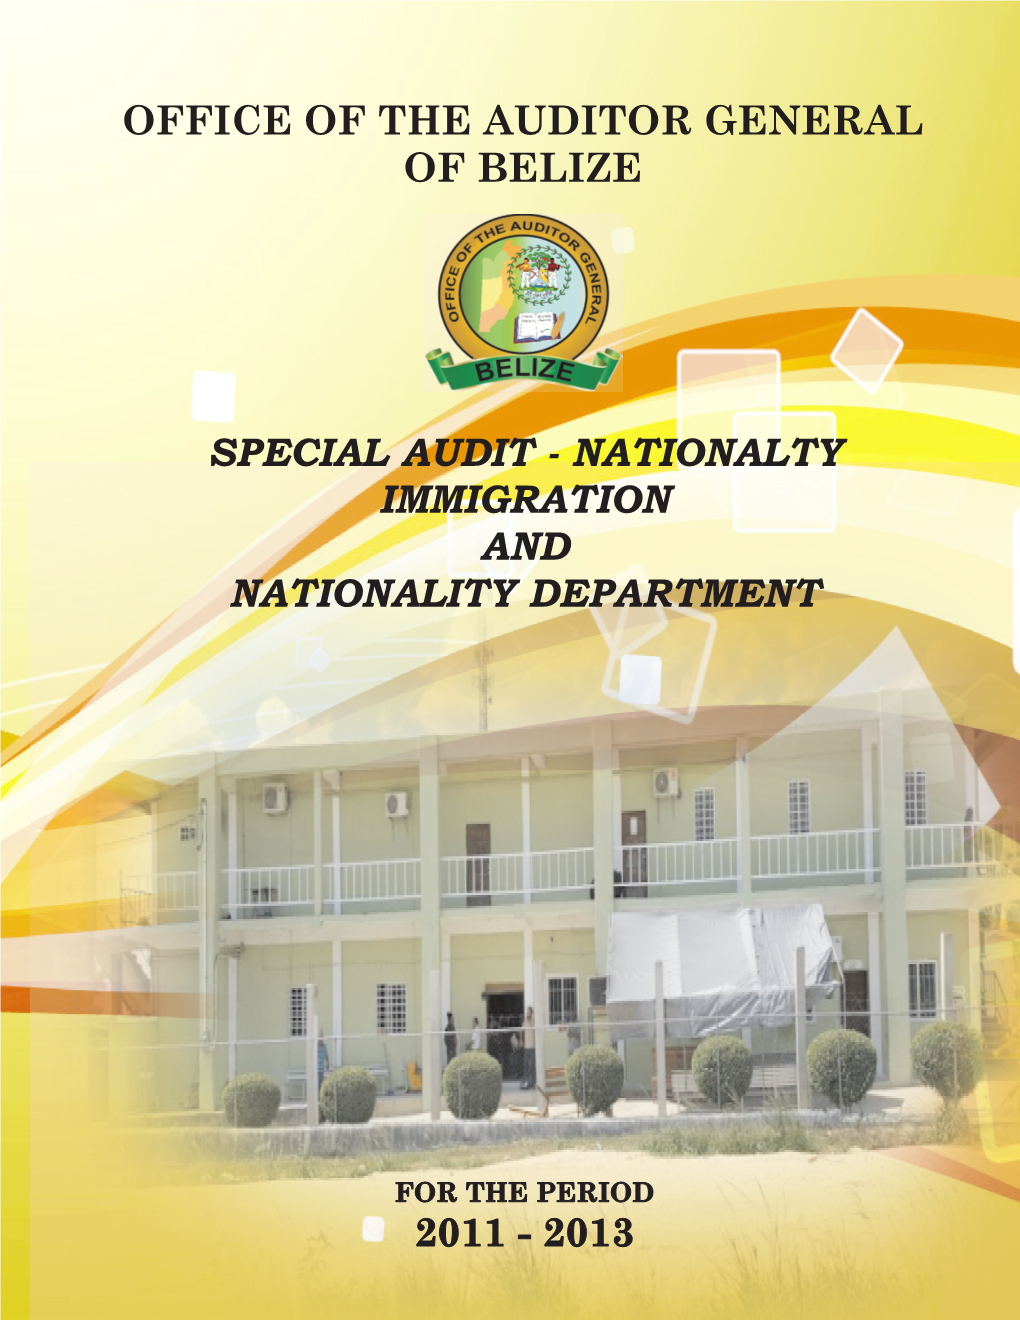 Nationality Immigration and Nationality Department